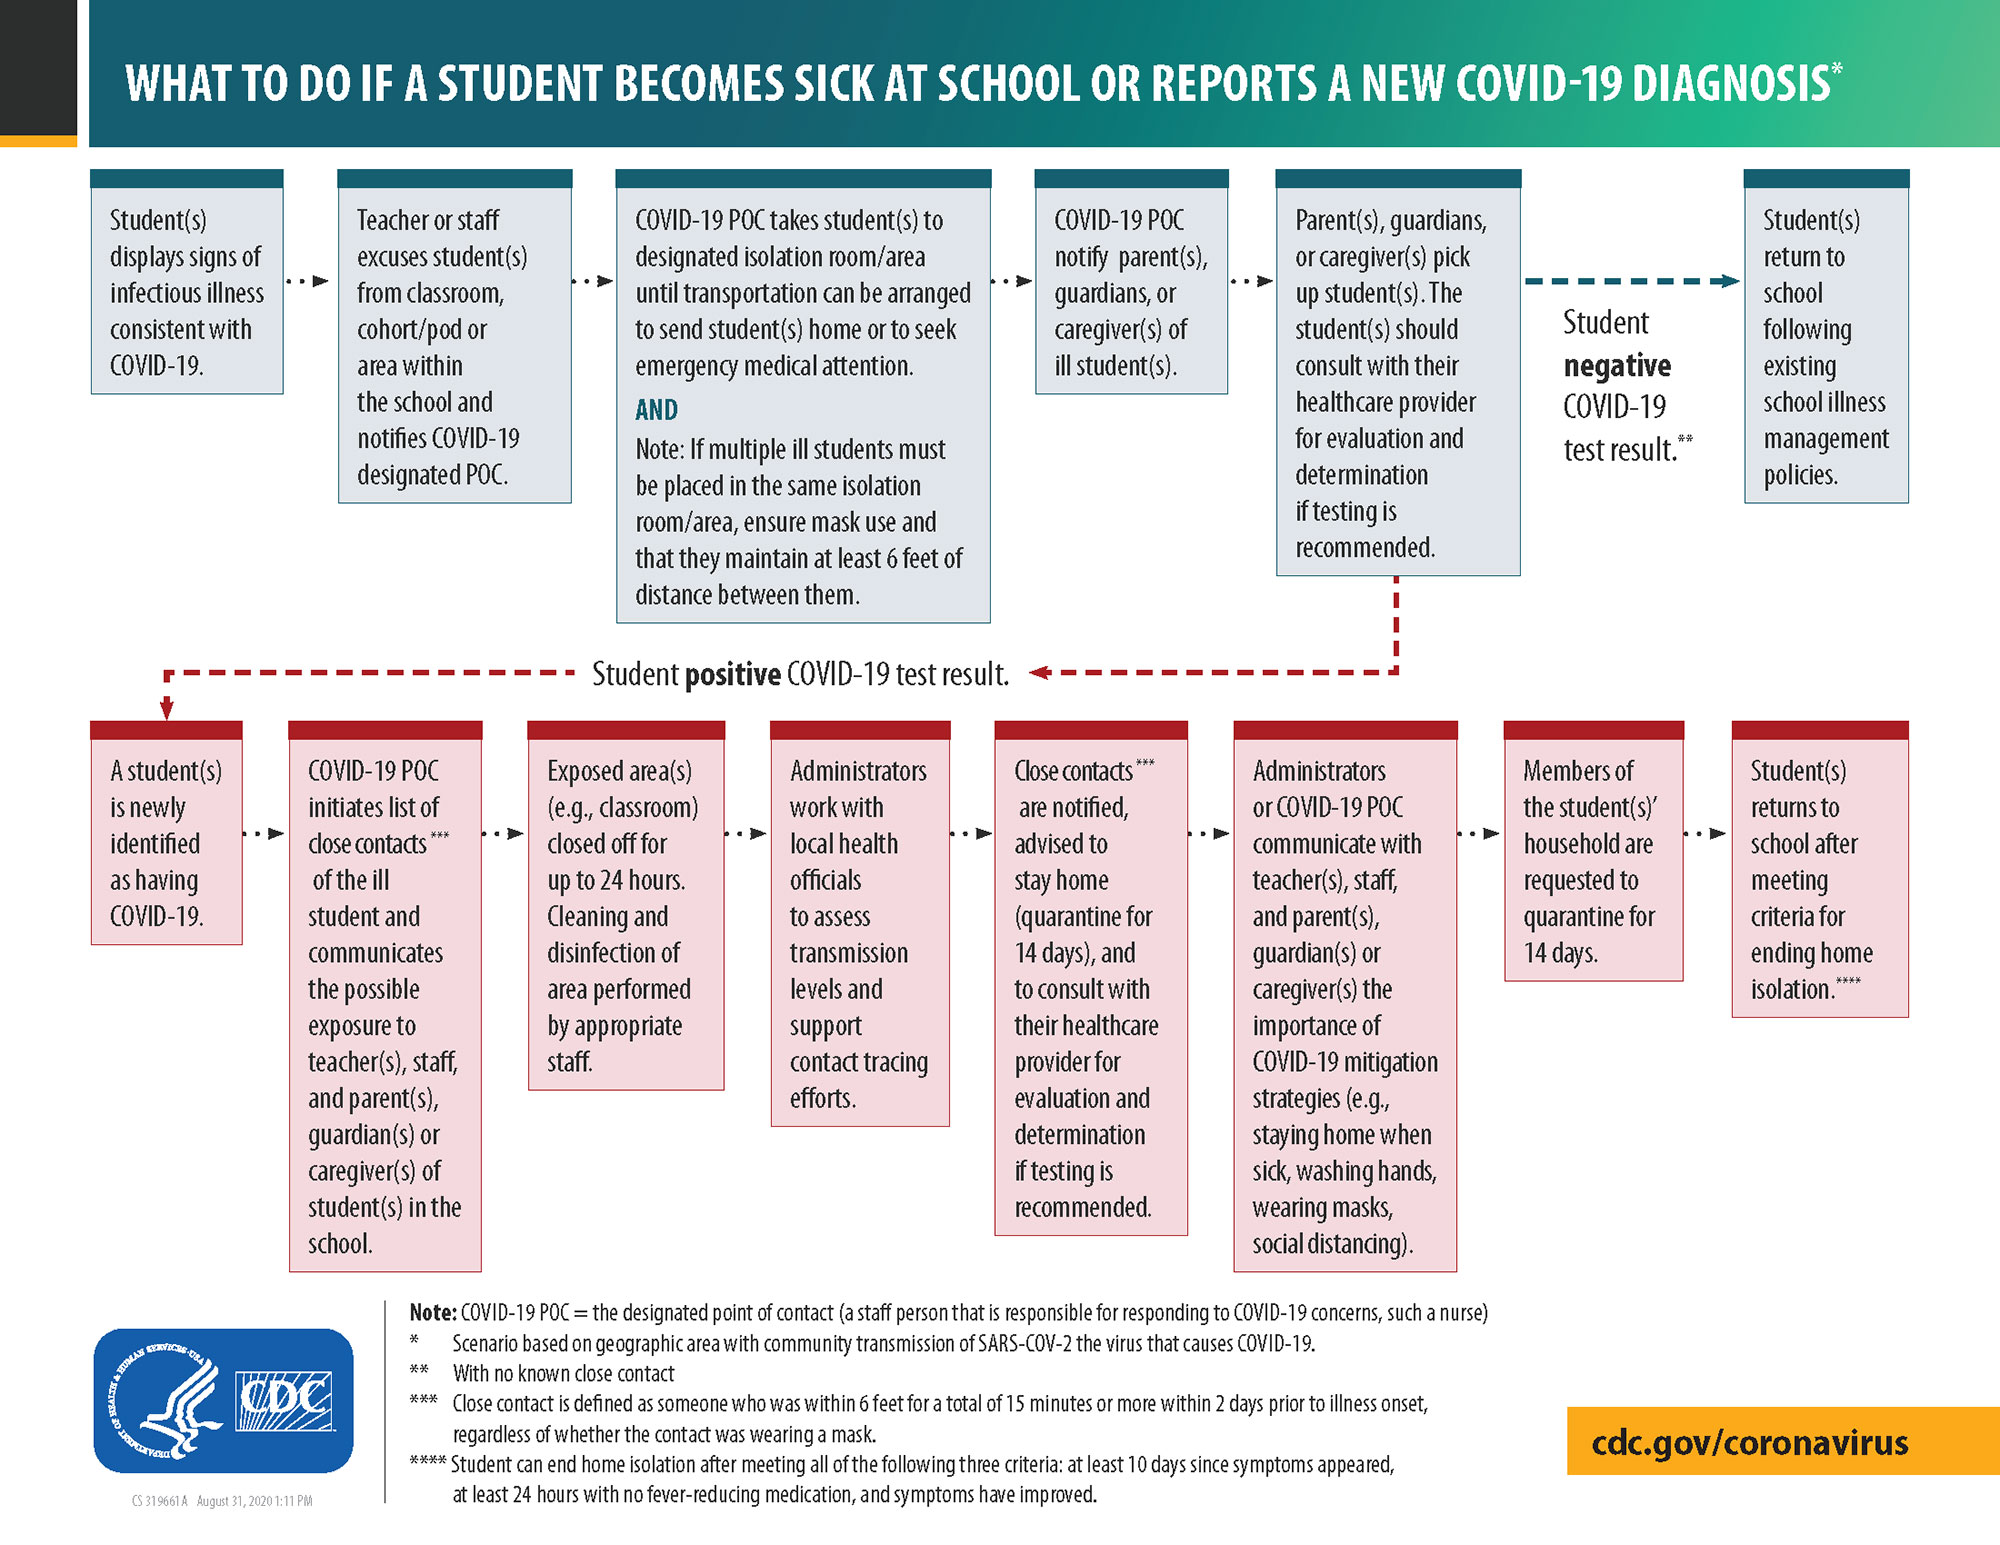 What to do if a Student Becomes Sick at School or Reports a New COVID-19 Diagnosis Flowchart.